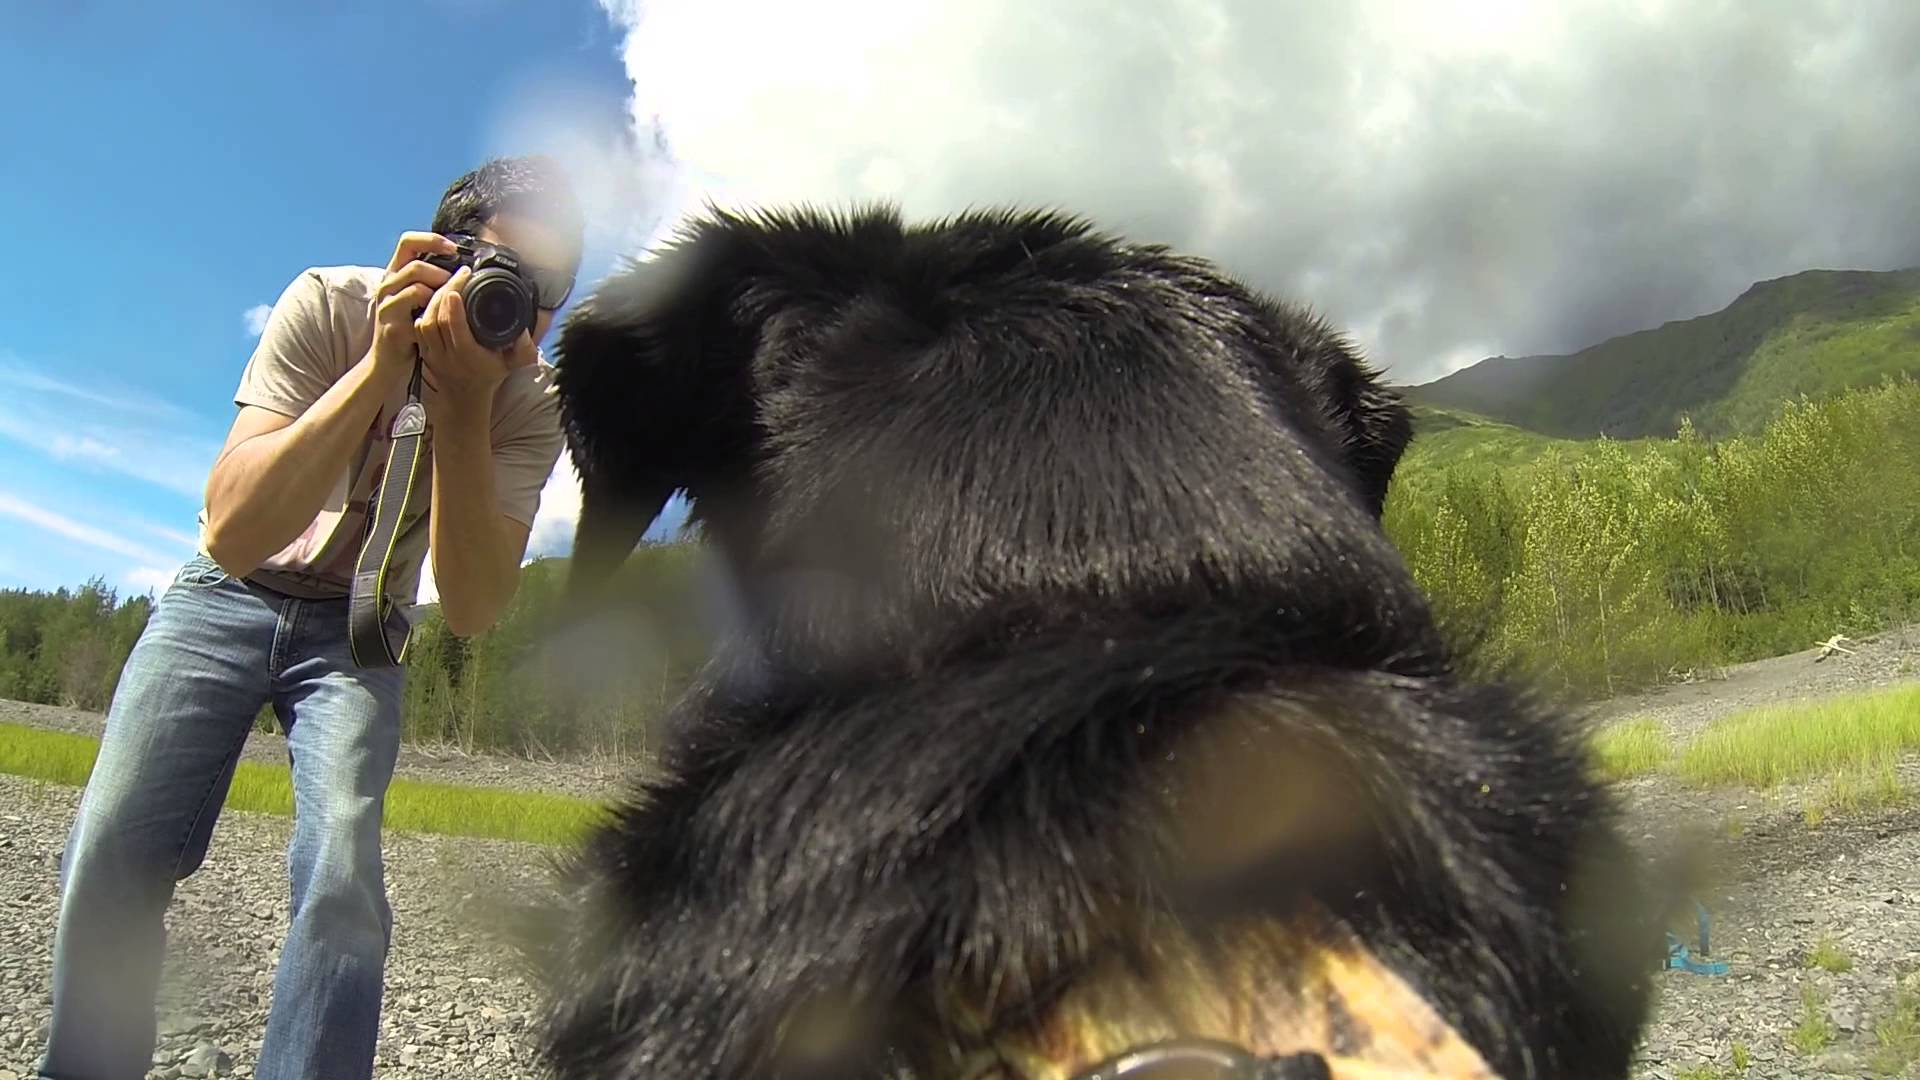 It's A Dogs View! (GoPro Hero 3 black edition dog vest mount) - YouTube